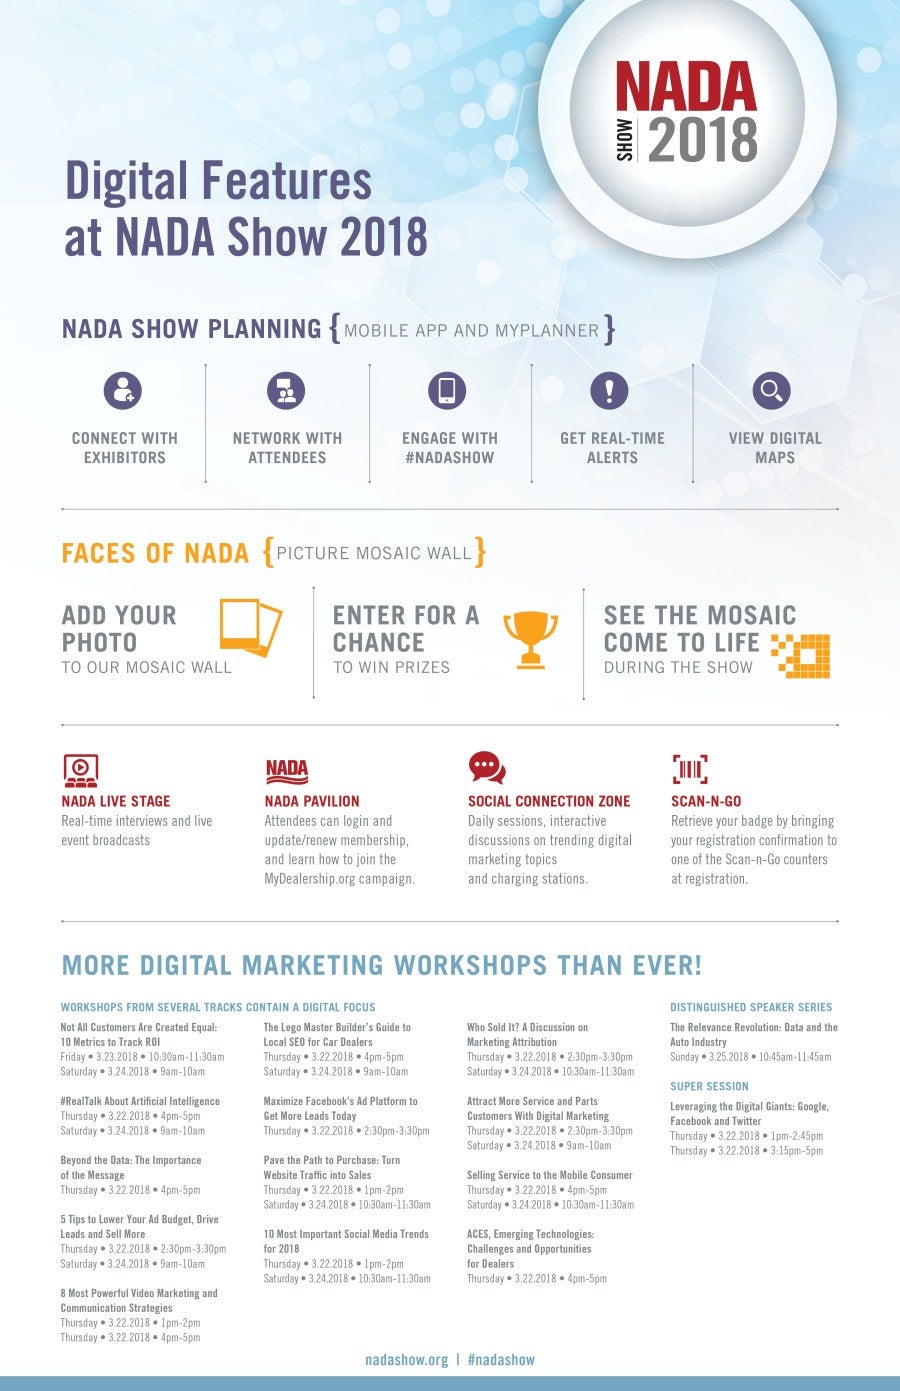 Digital Features at NADA Show Infographic